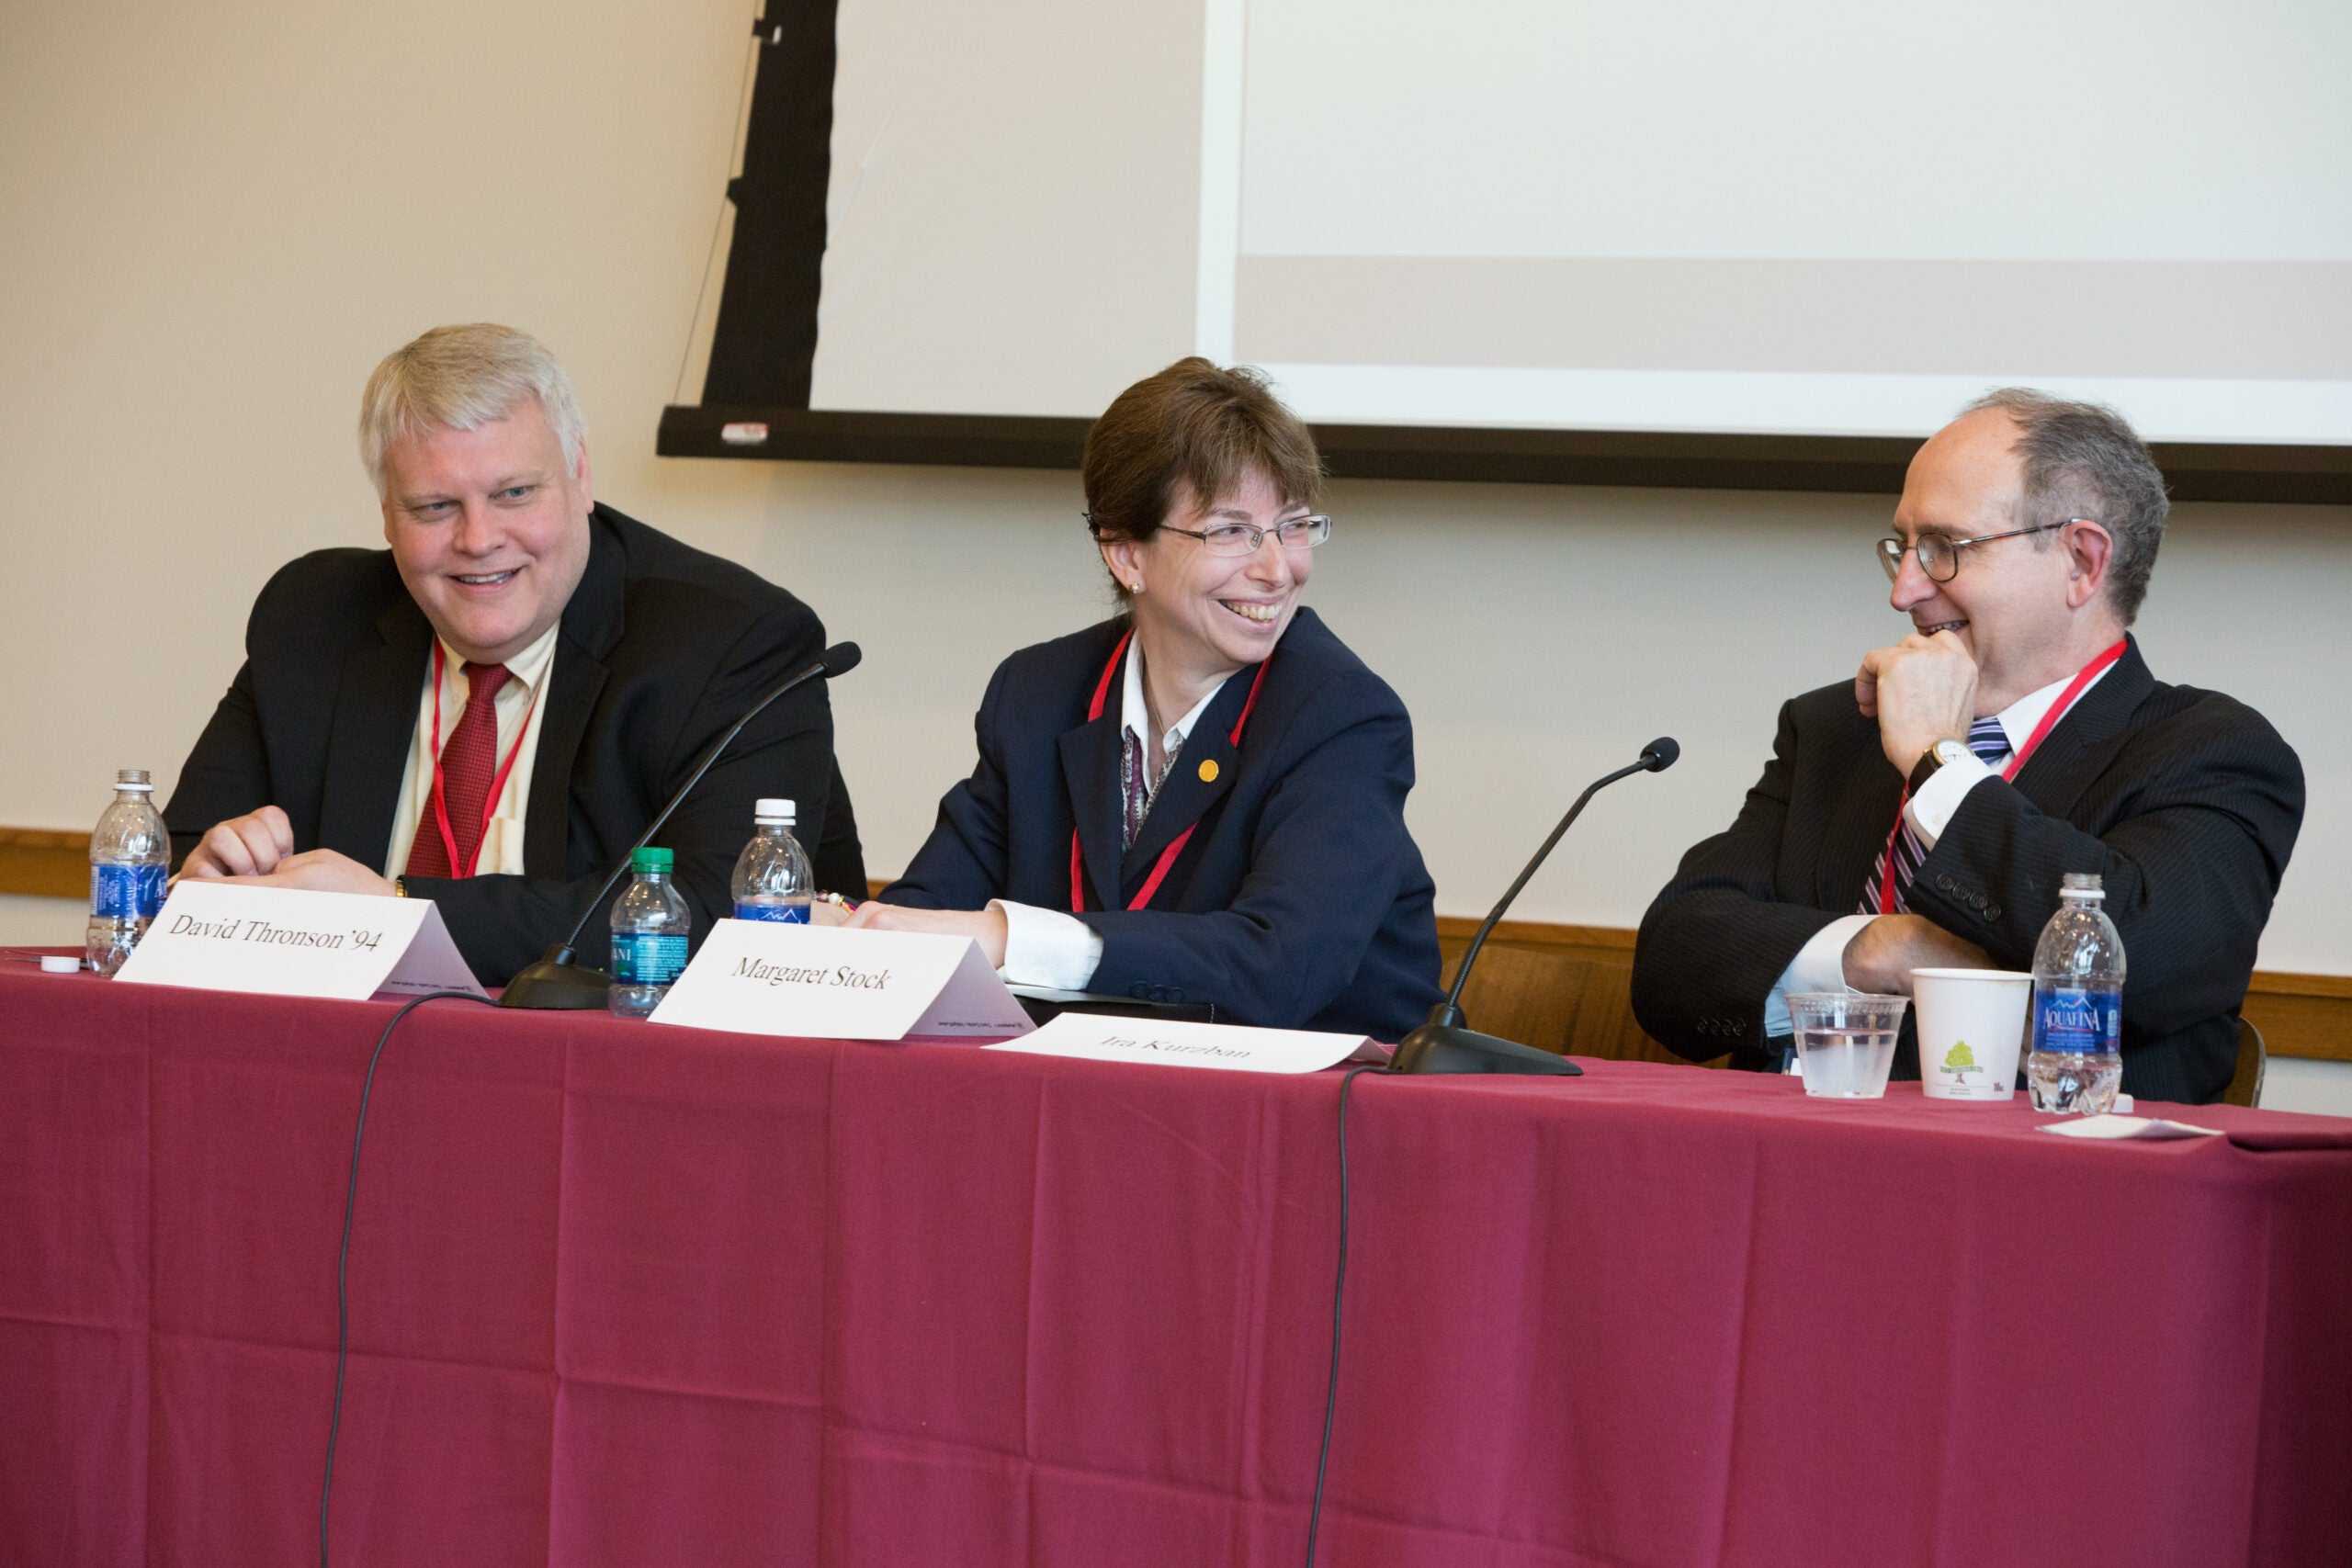 David Thronson, Margaret Stock '92, Ira Kurzban, and Pratt speaking at a table in front of the room